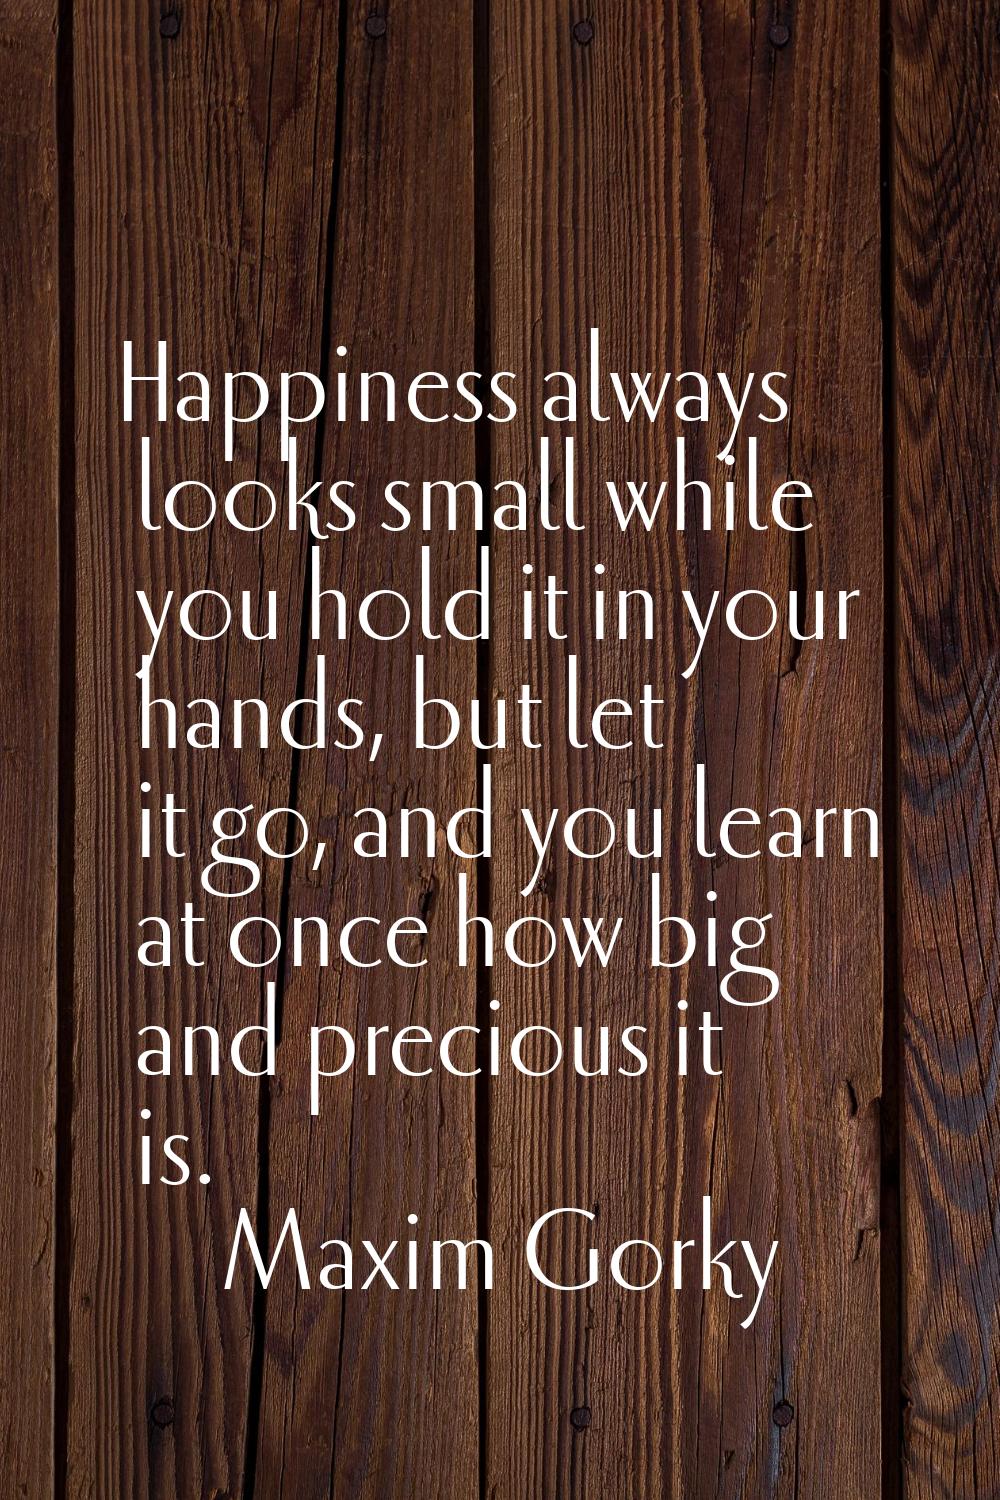 Happiness always looks small while you hold it in your hands, but let it go, and you learn at once 